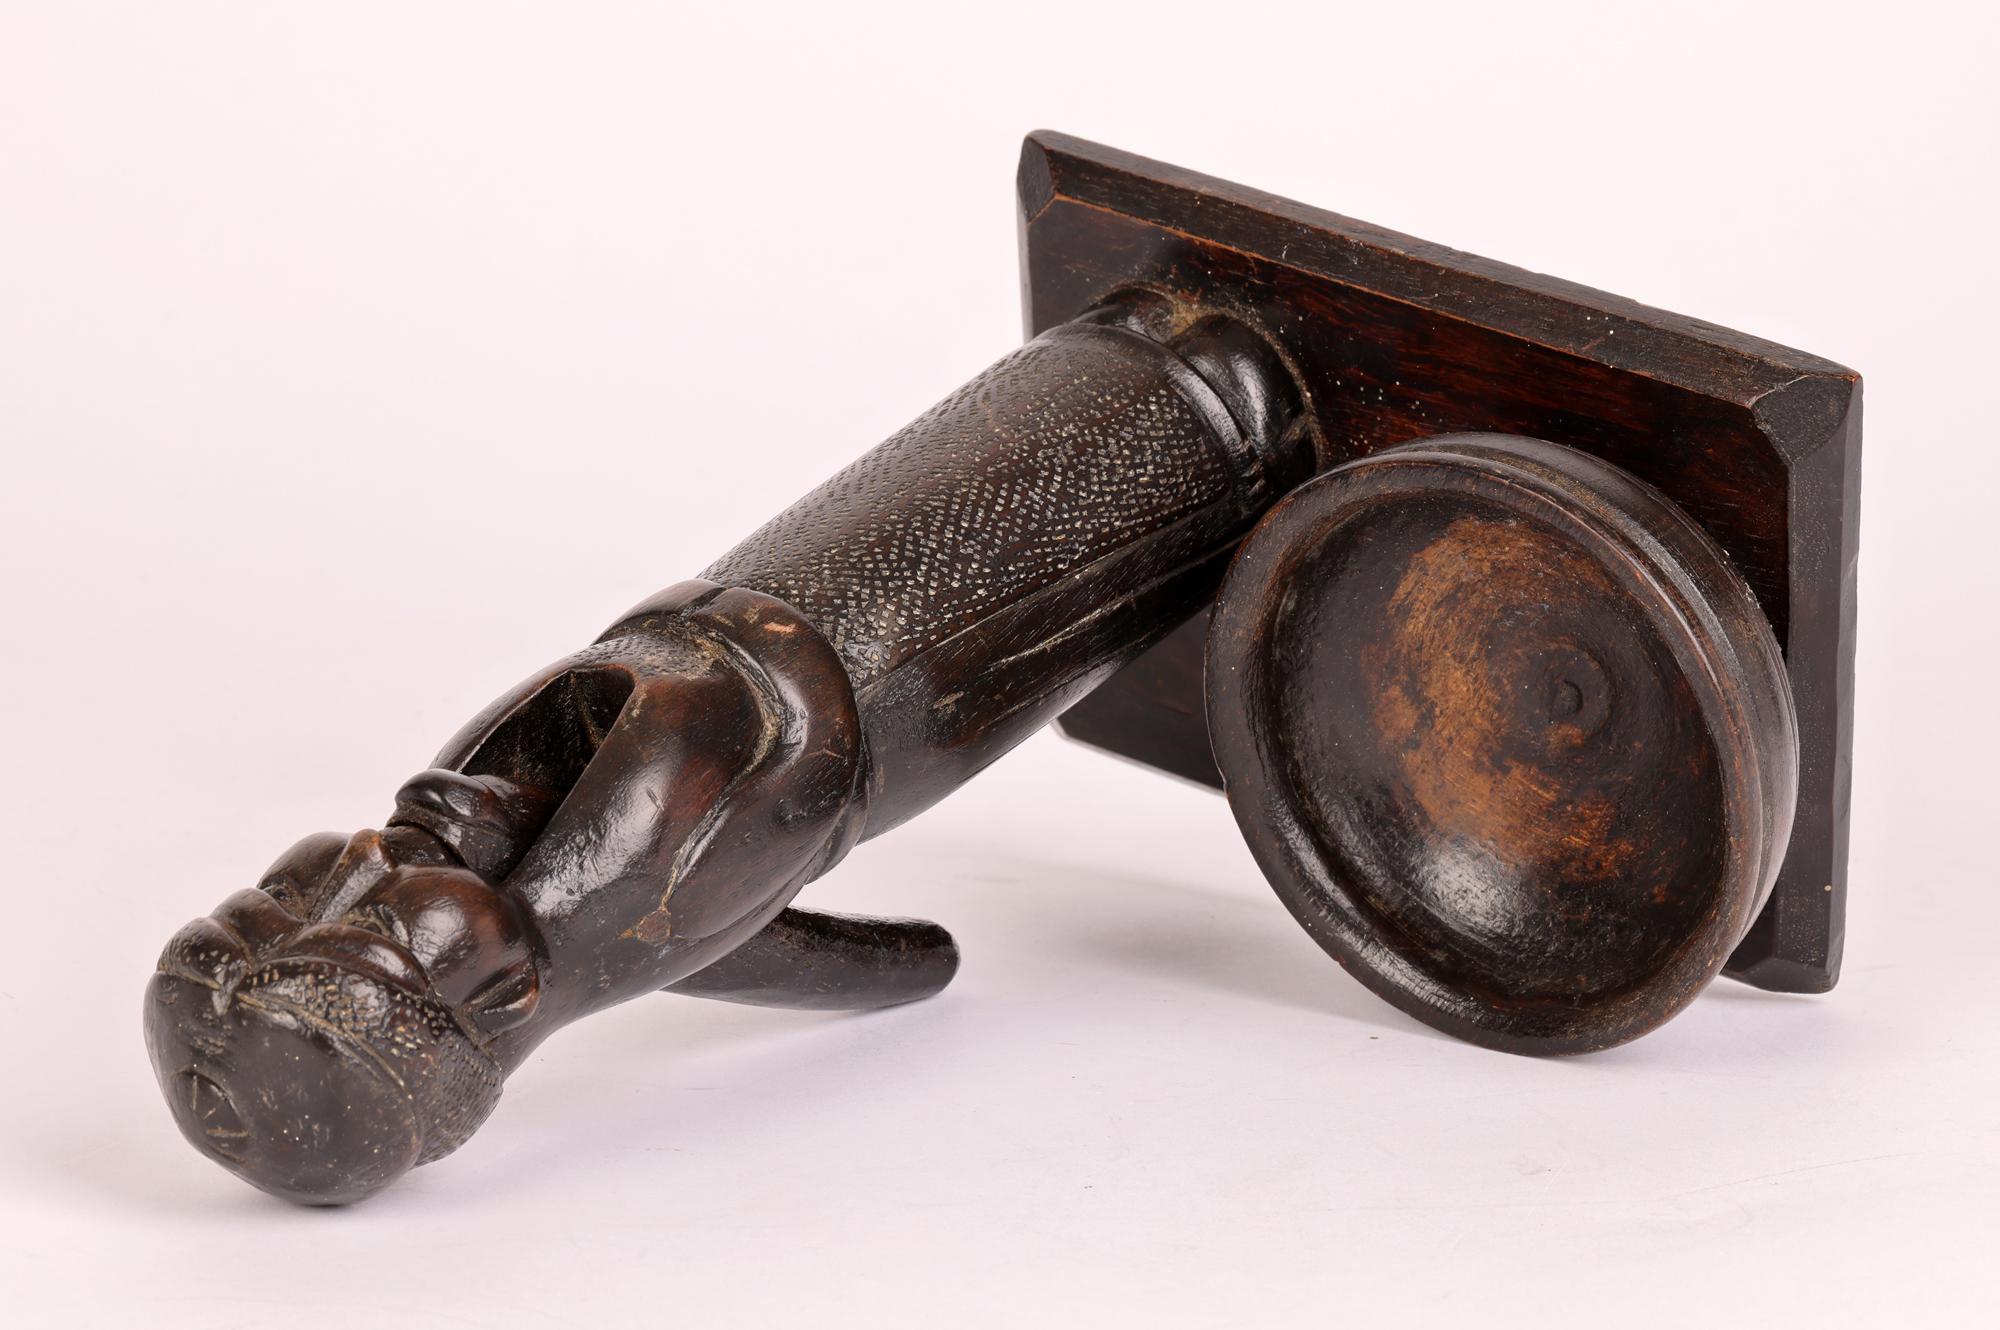 Unusual Antique Carved Wood Figural Nutcracker and Bowl In Good Condition For Sale In Bishop's Stortford, Hertfordshire